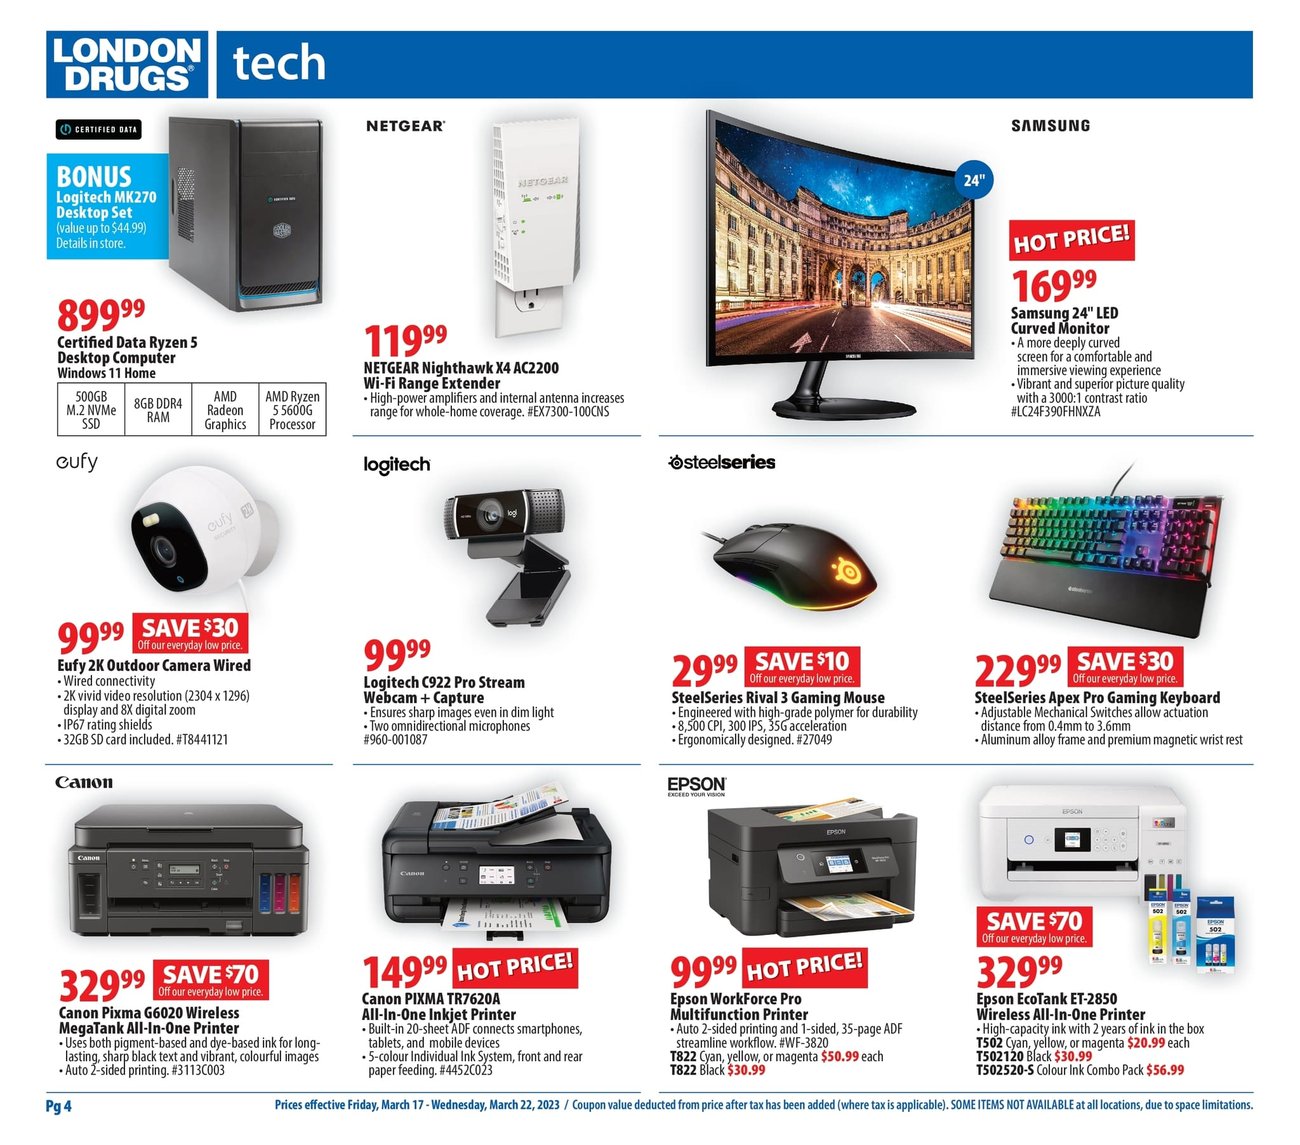 London Drugs - Weekly Flyer Specials - Page 4